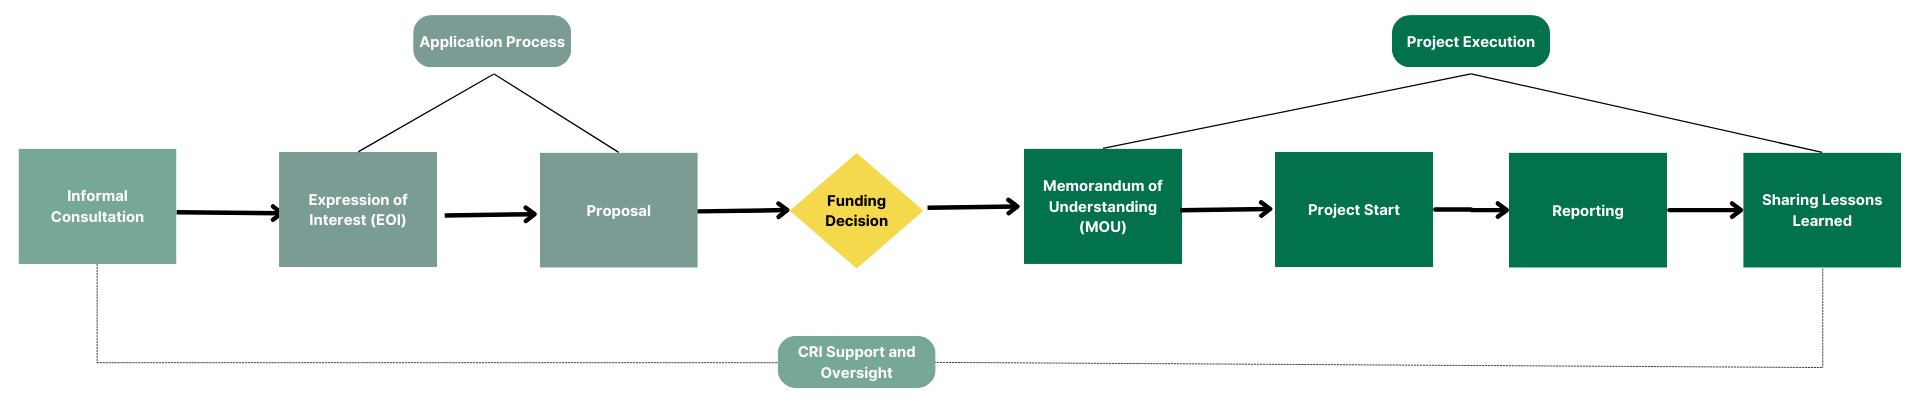 Step 1 is an informal consultation Step 2 is writing an expression of interest (aka EOI) Step 3 is a proposal Step 4 is a funding decision Step 5 is a memorandum of understanding (aka MOU) Step 6 project starts Step 7 reporting Step 8 sharing lessons learned At every step is CRI support and oversight